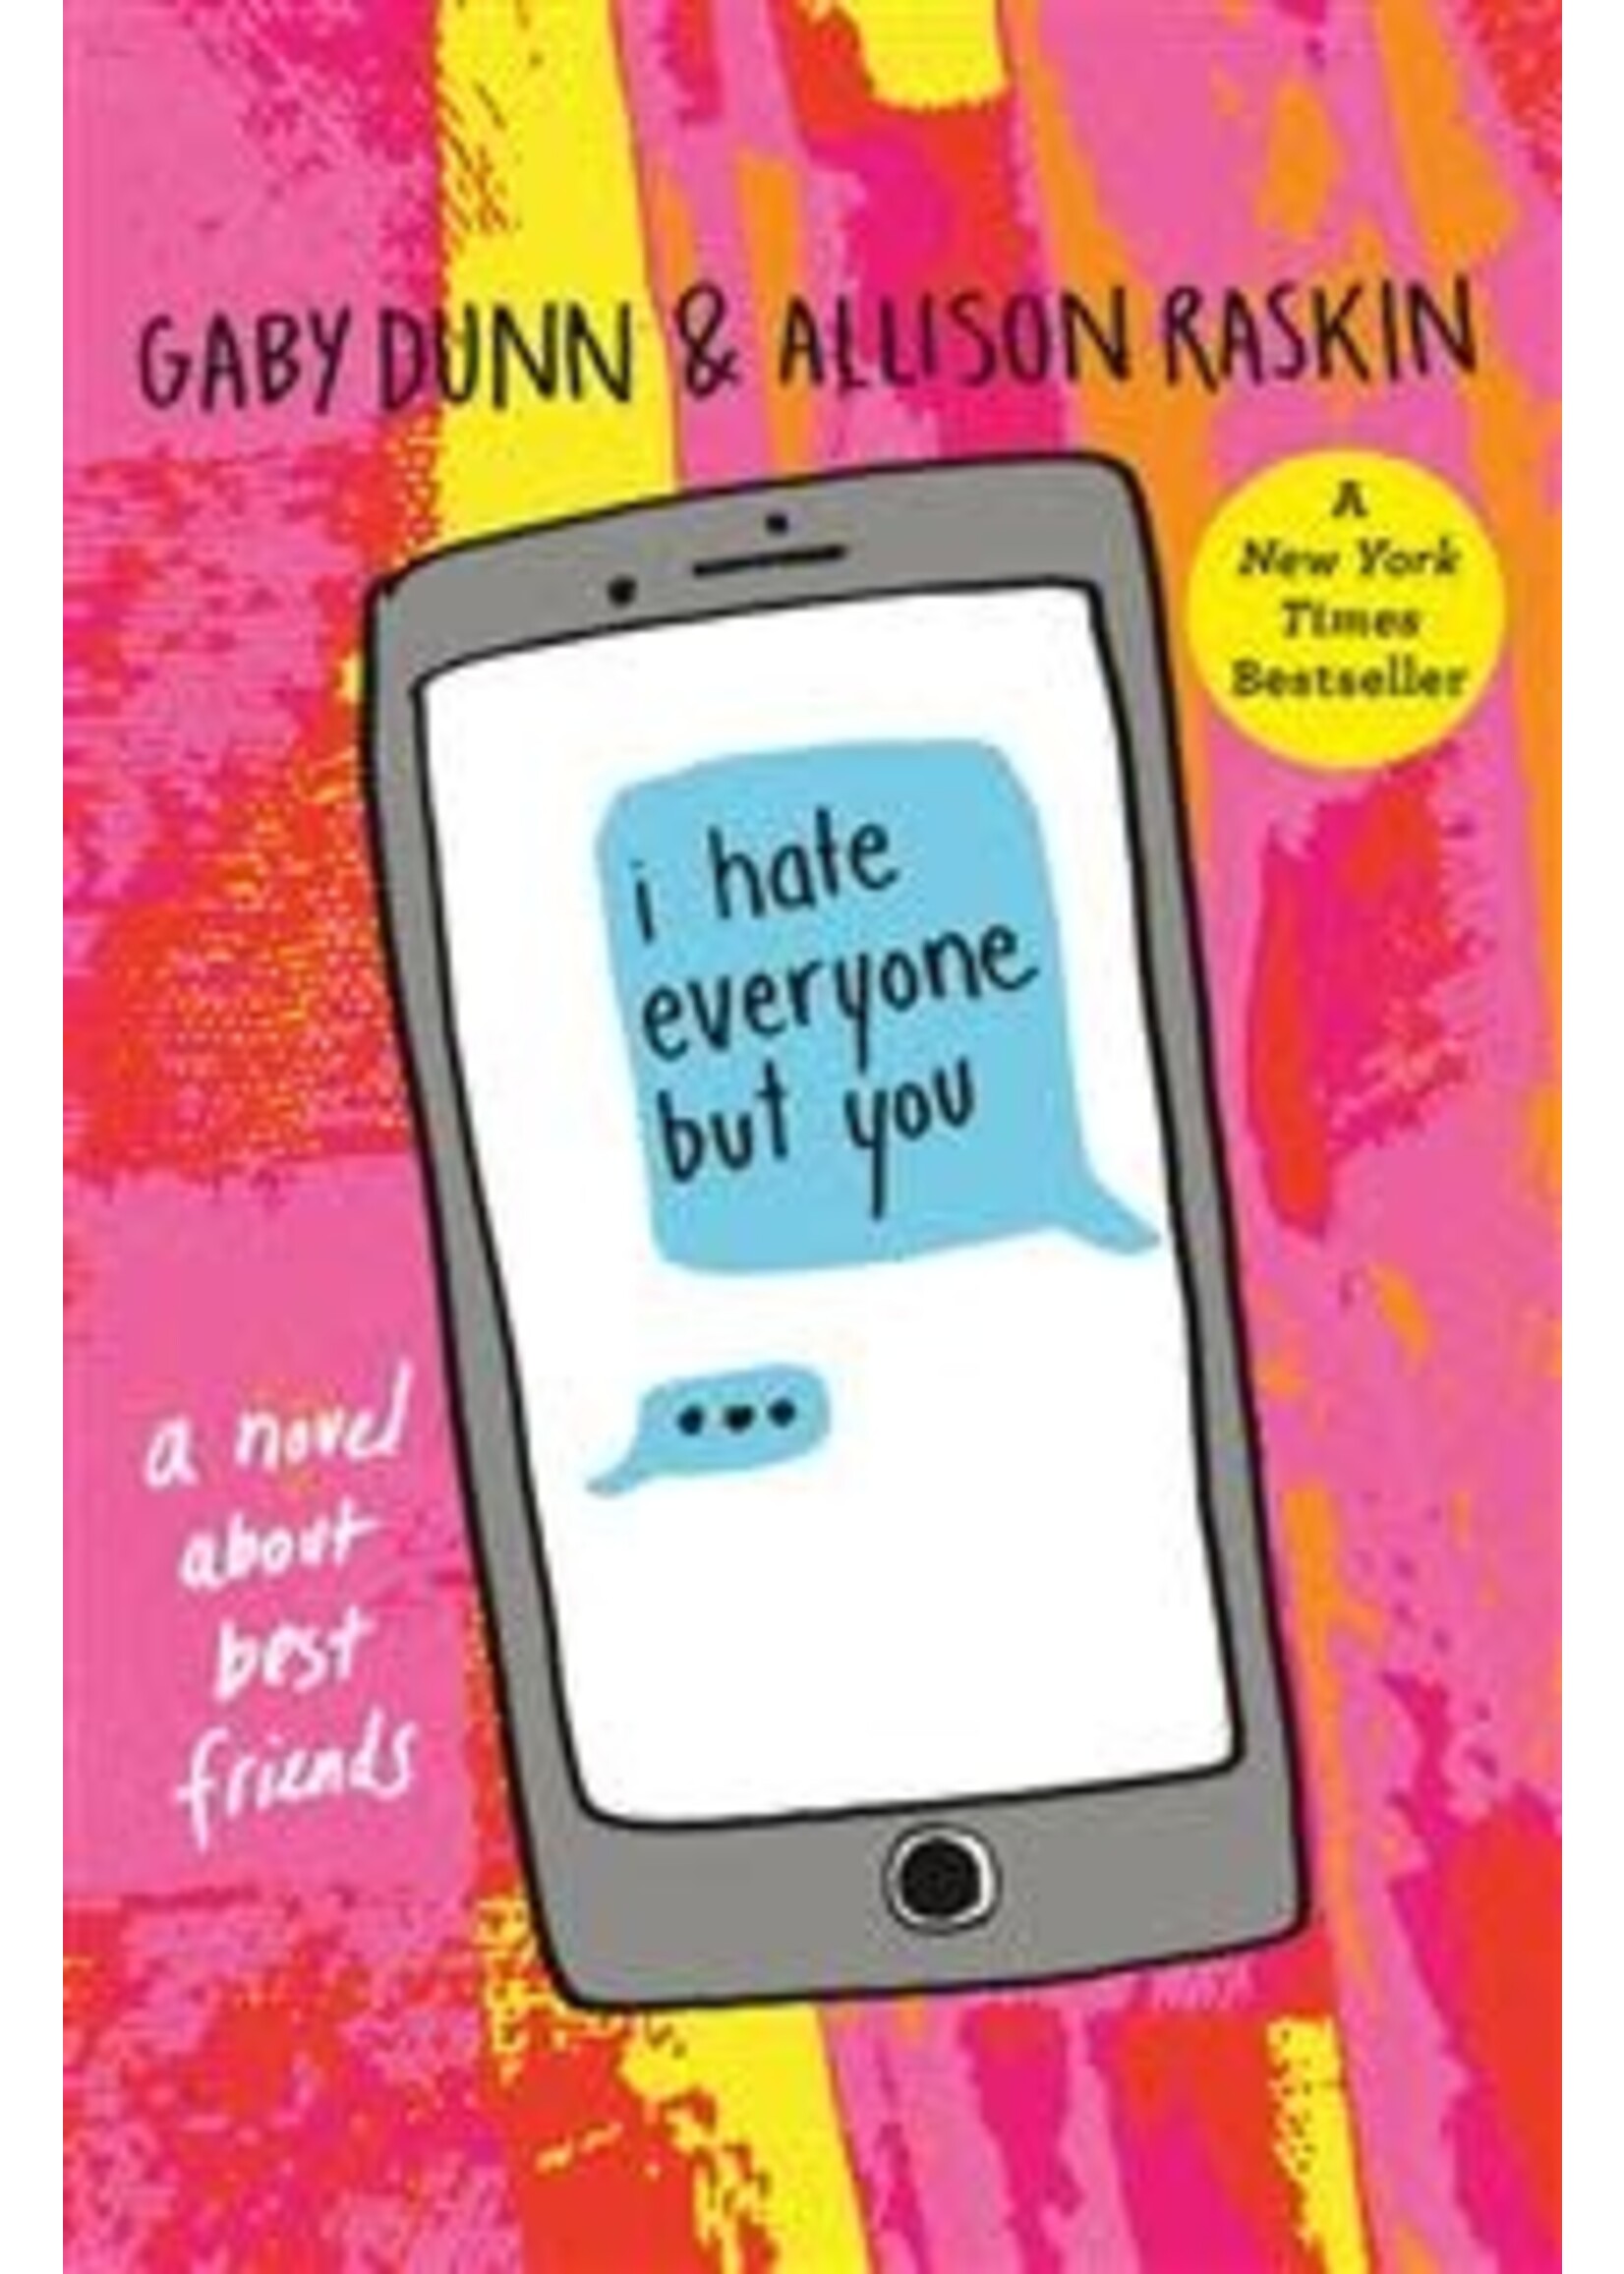 I Hate Everyone But You: A Novel About Best Friends by Gaby Dunn, Allison Raskin